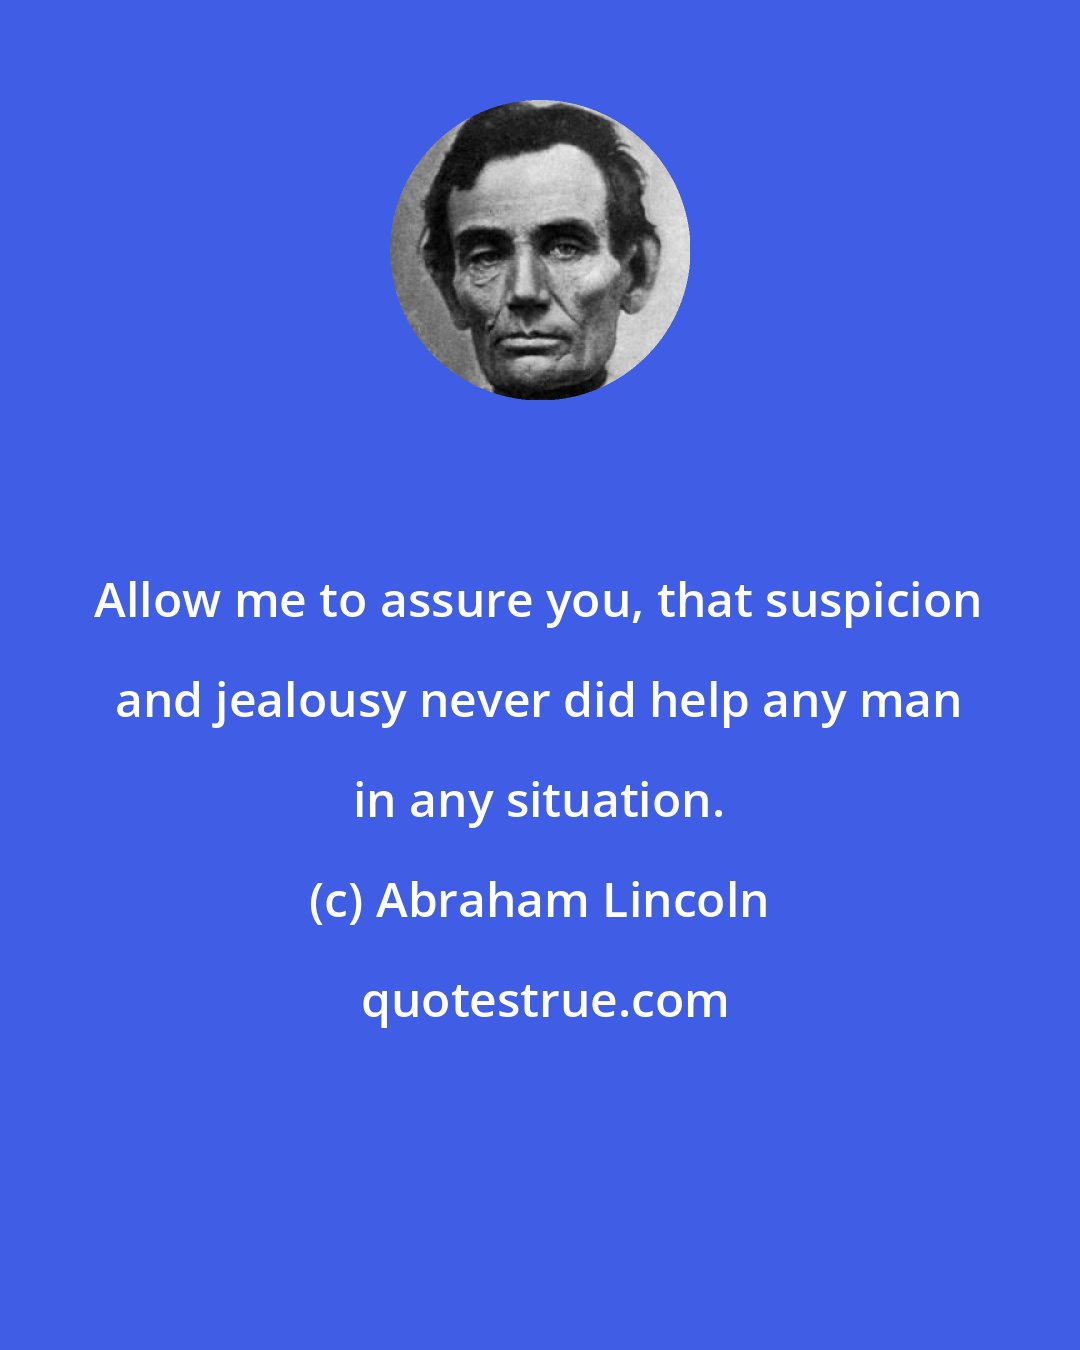 Abraham Lincoln: Allow me to assure you, that suspicion and jealousy never did help any man in any situation.